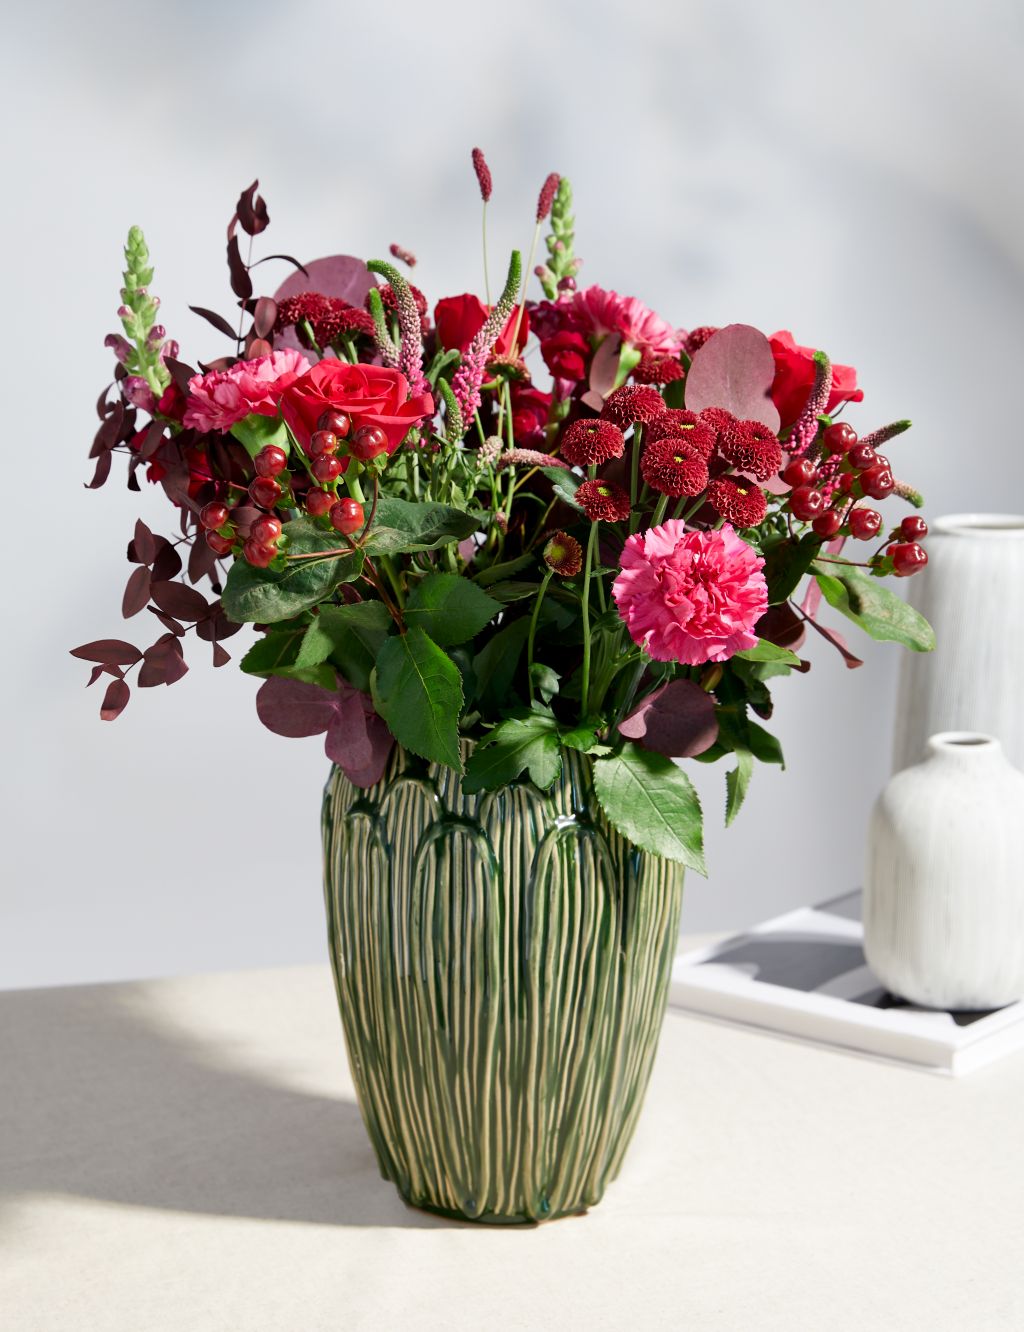 Be Bold on Your Birthday at From You Flowers